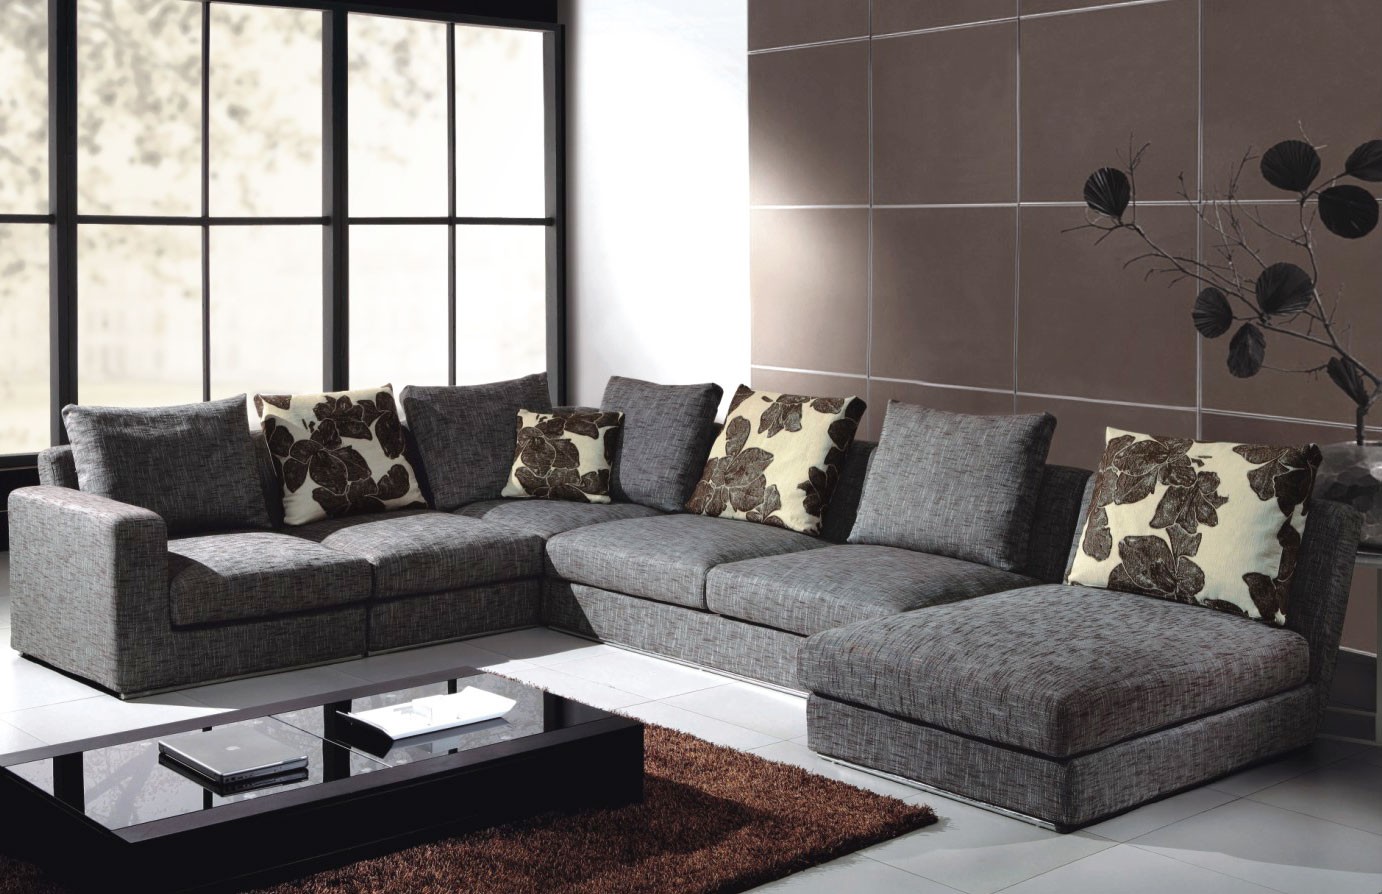 Classic Living With Inspiring Classic Living Room Design With Dark Grey Colored Sofa Sectional And Dark Brown Colored Rug Carpet Dream Homes Enchanting Living Room Decorating With A Large Sectional Sofas